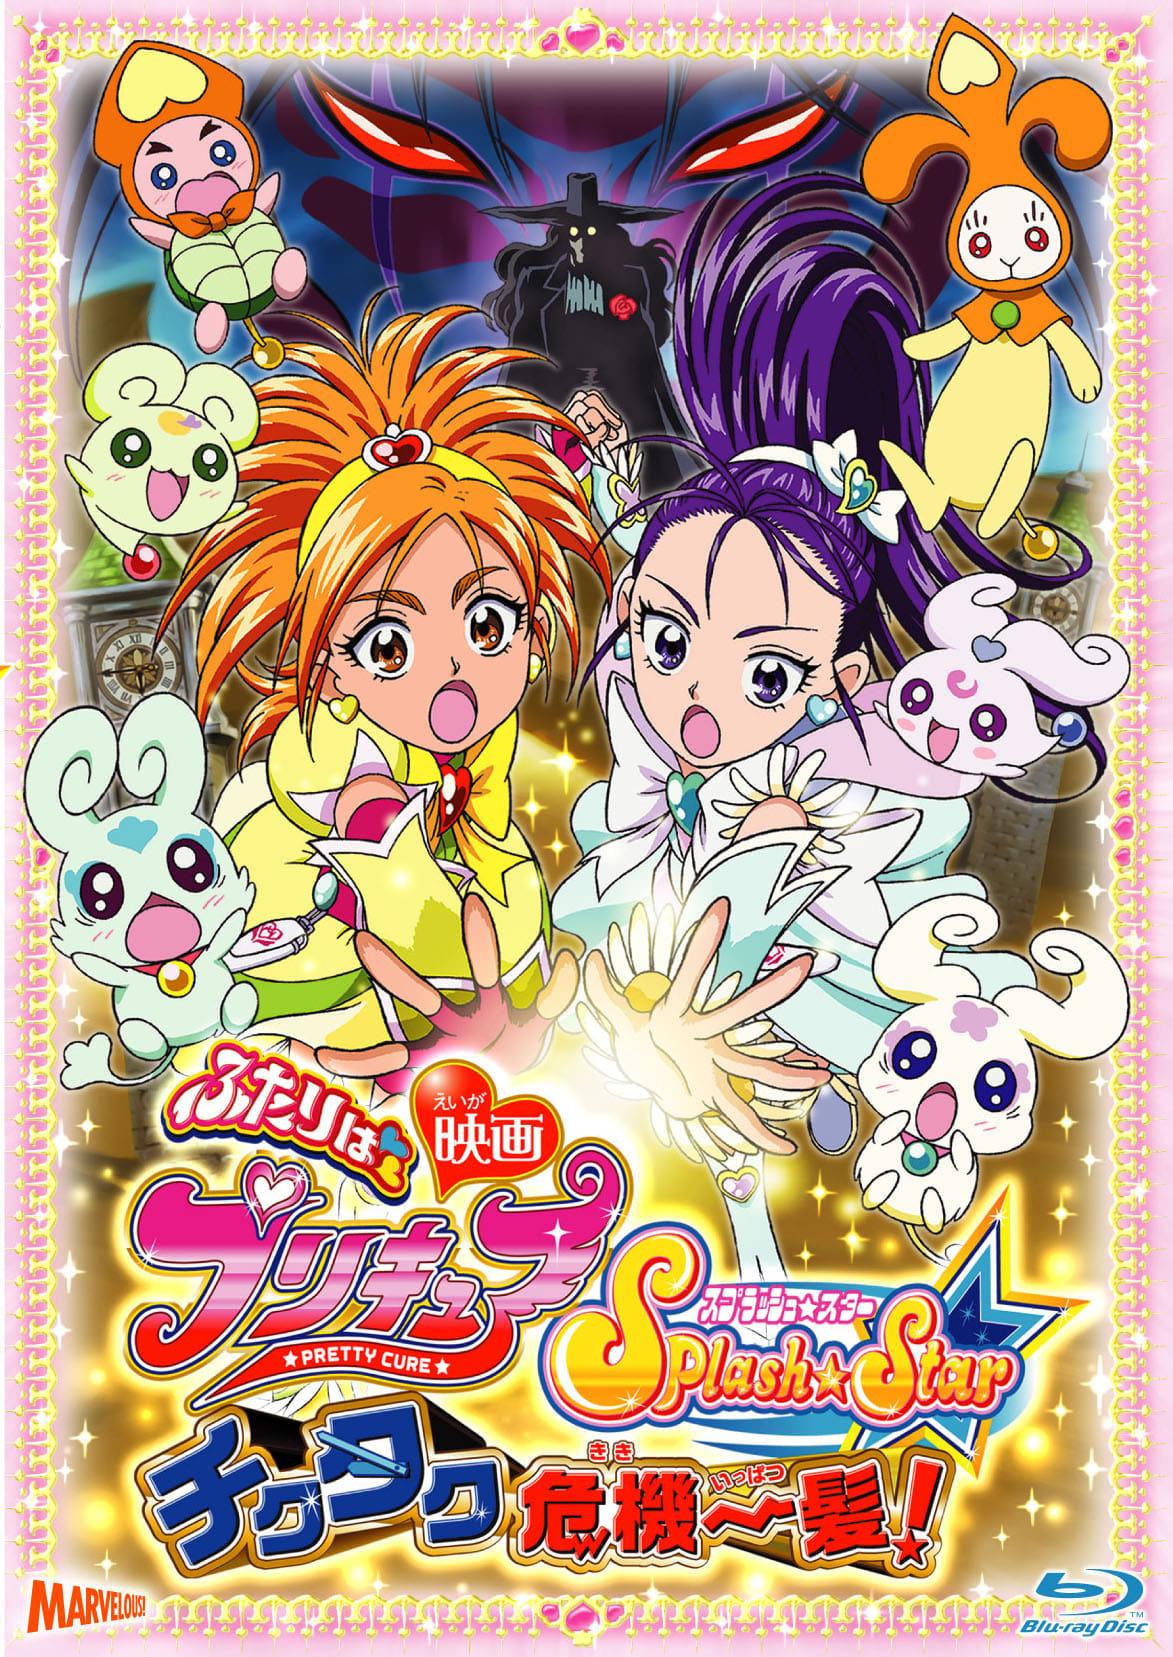 Pretty Cure Movie 3 Splash Star Tic-Tac Crisis Hanging by a Thin Thread! poster